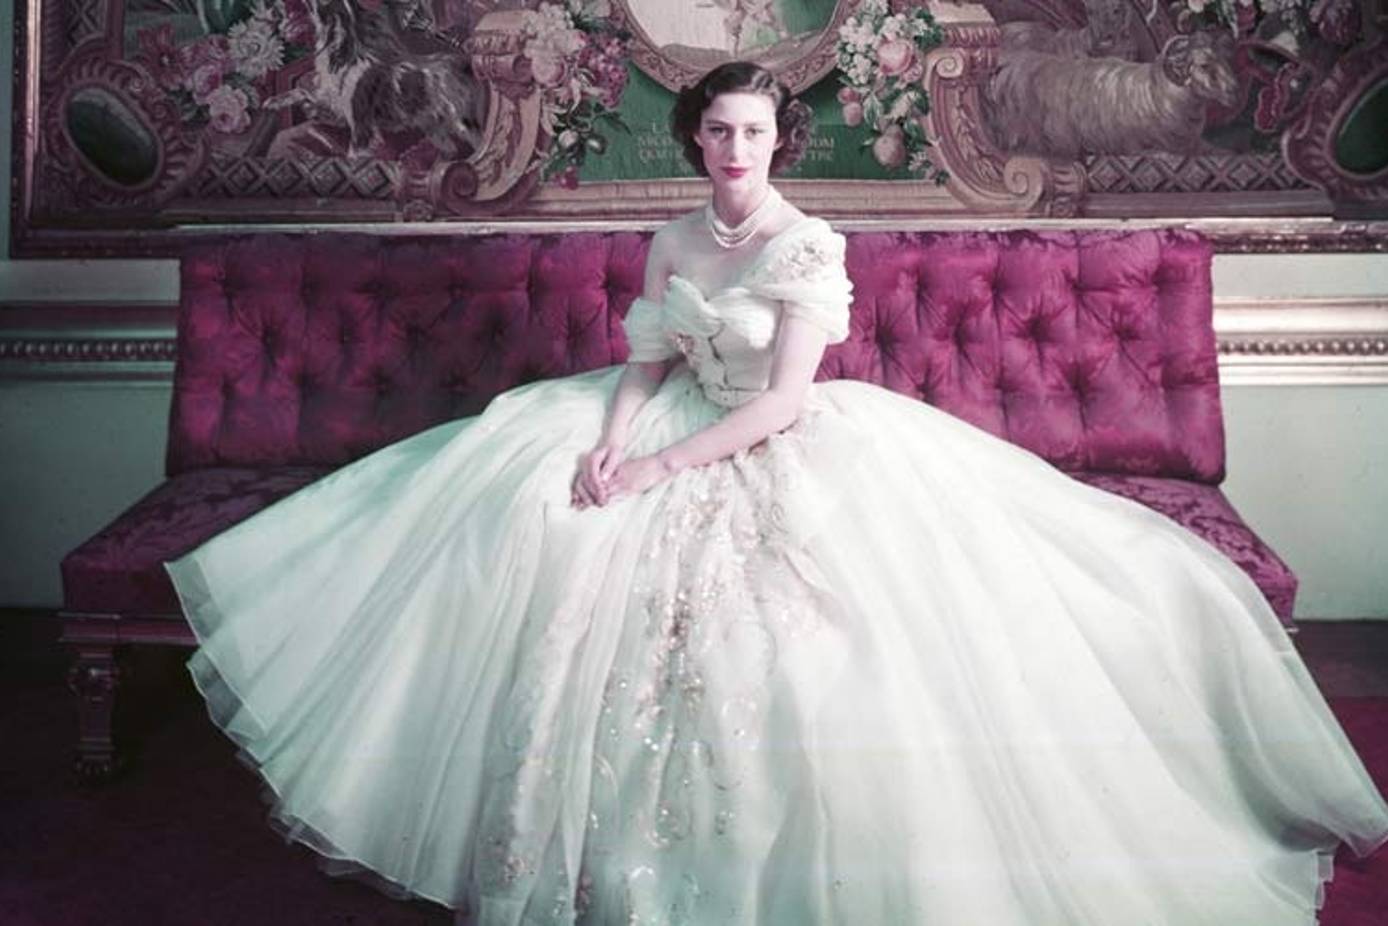 Born on this day in fashion history: Christian Dior and Cristobal